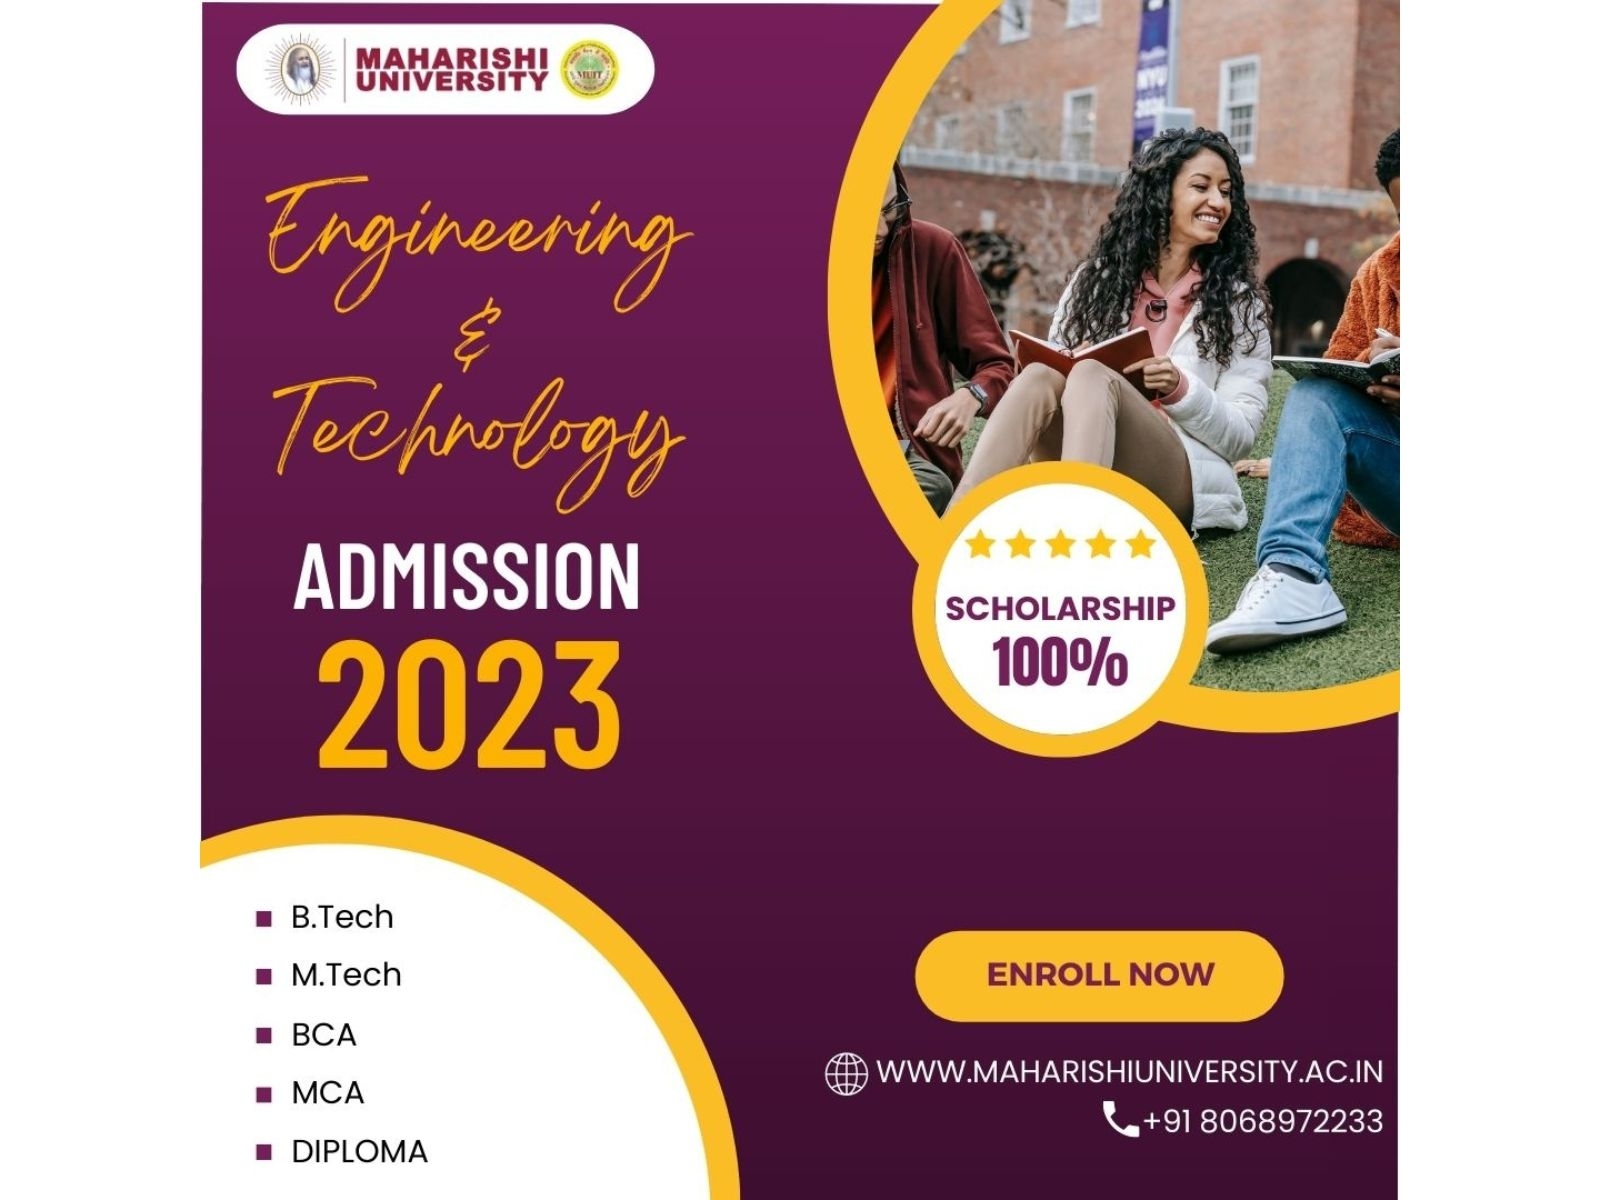 Best Engineering Colleges In India Maharishi University by Mayank